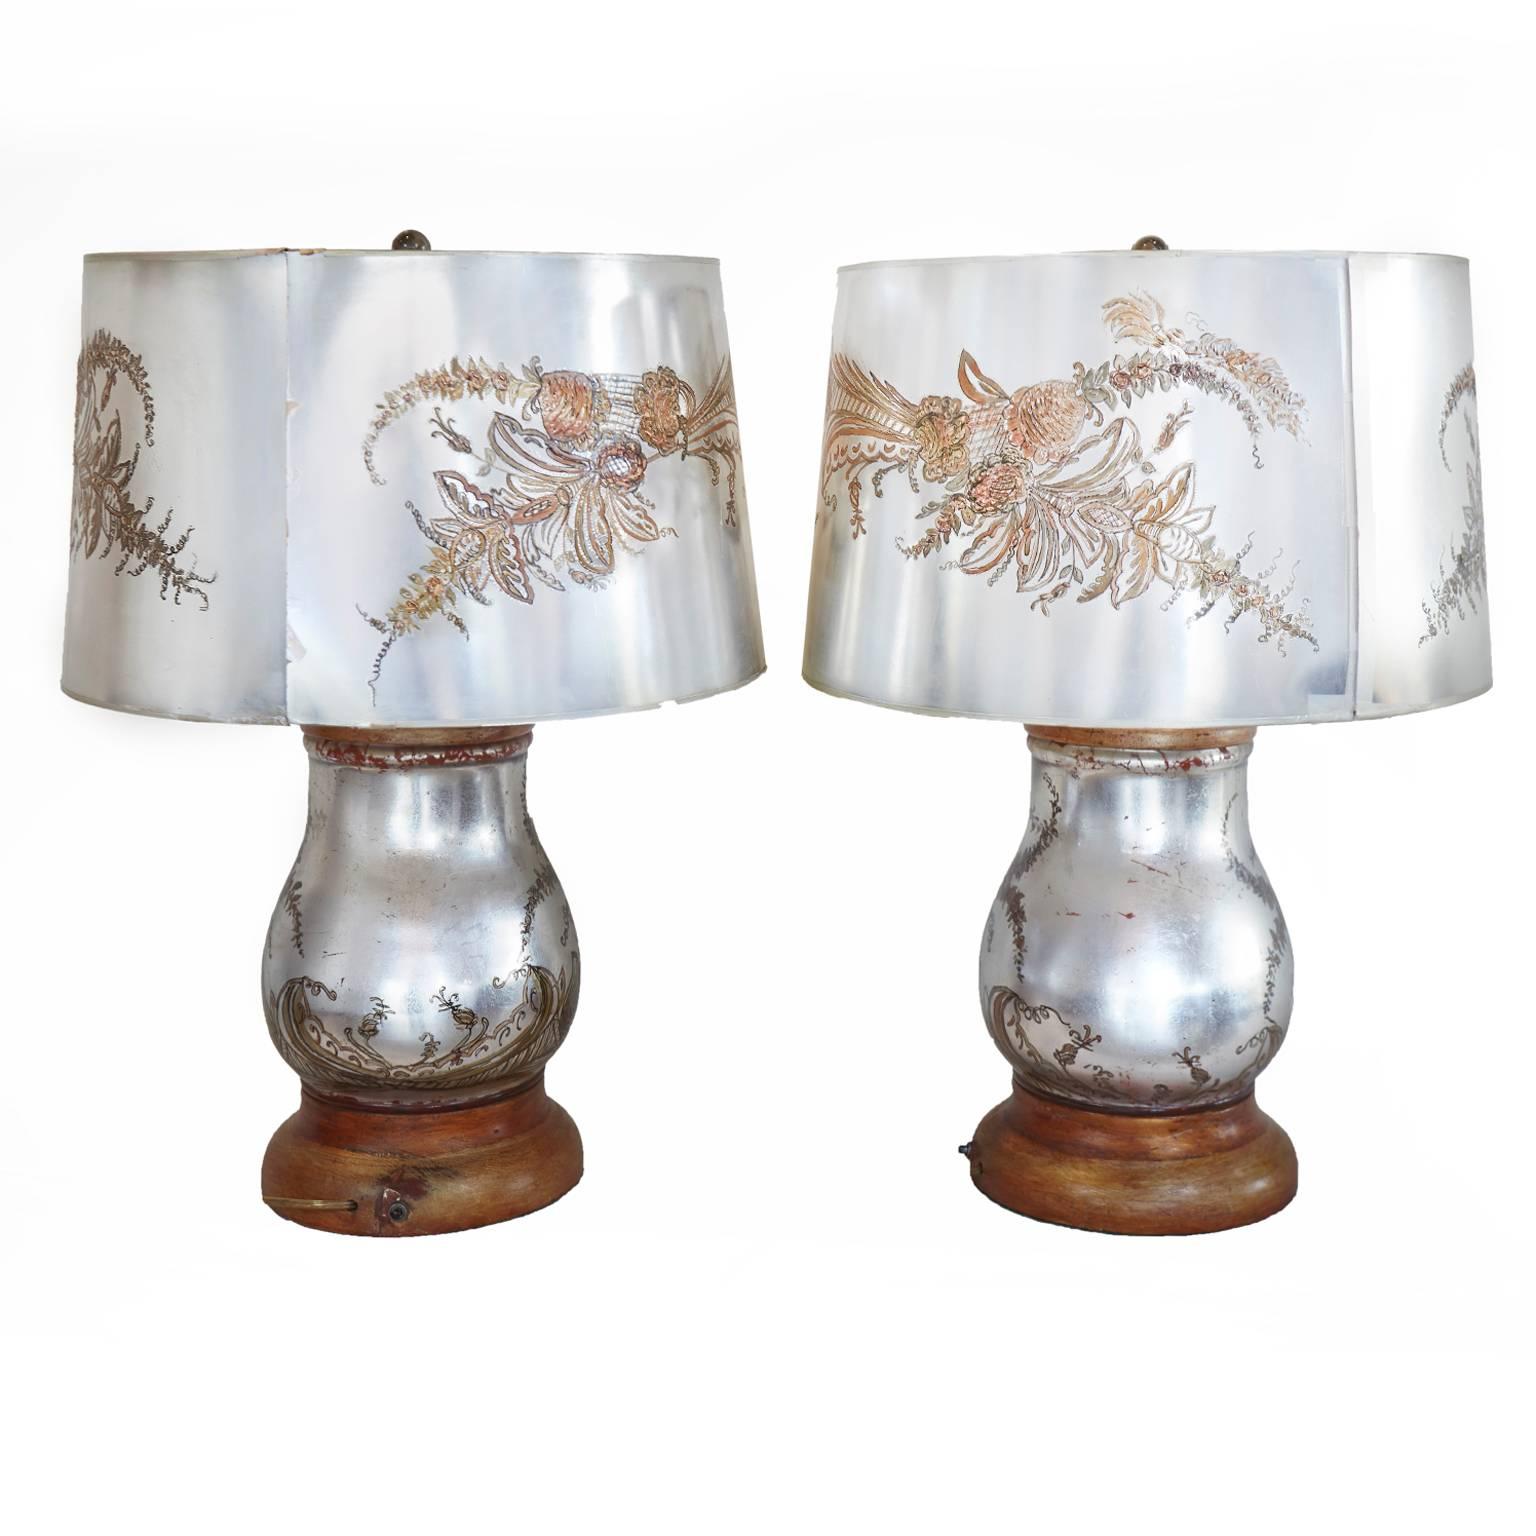 Stunning Pair of Verre Eglomise Table Lamps with Original Shades In Good Condition For Sale In Tucson, AZ